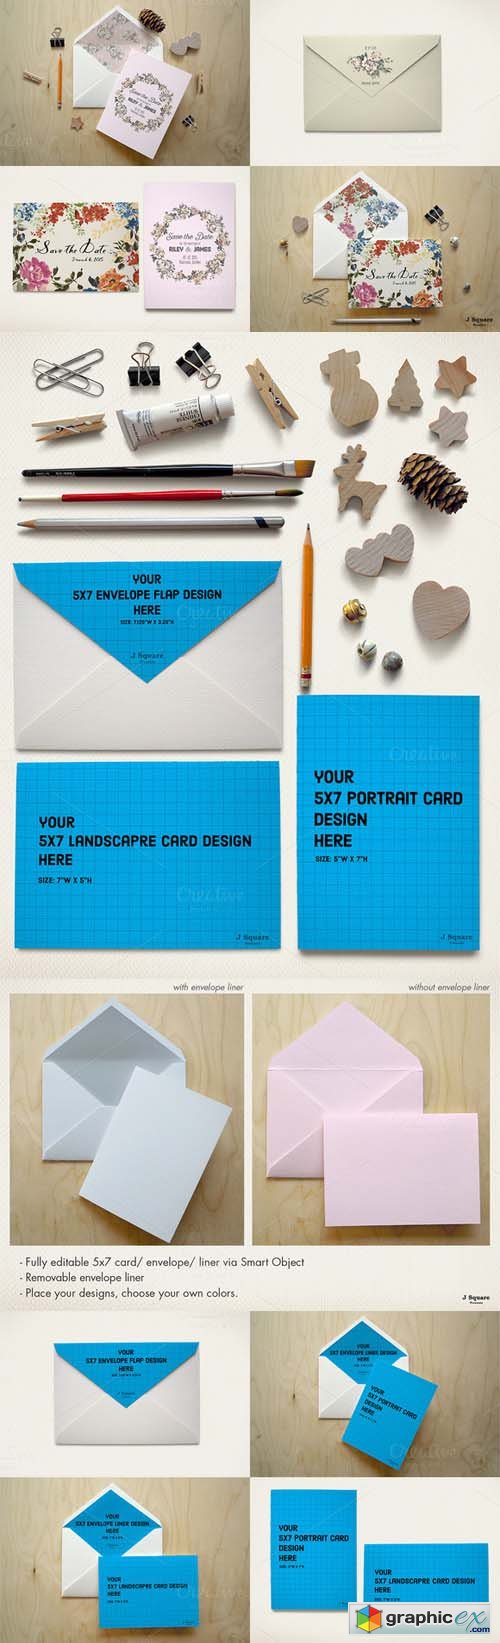 5x7 Card/Envelope/Objects Mock Up